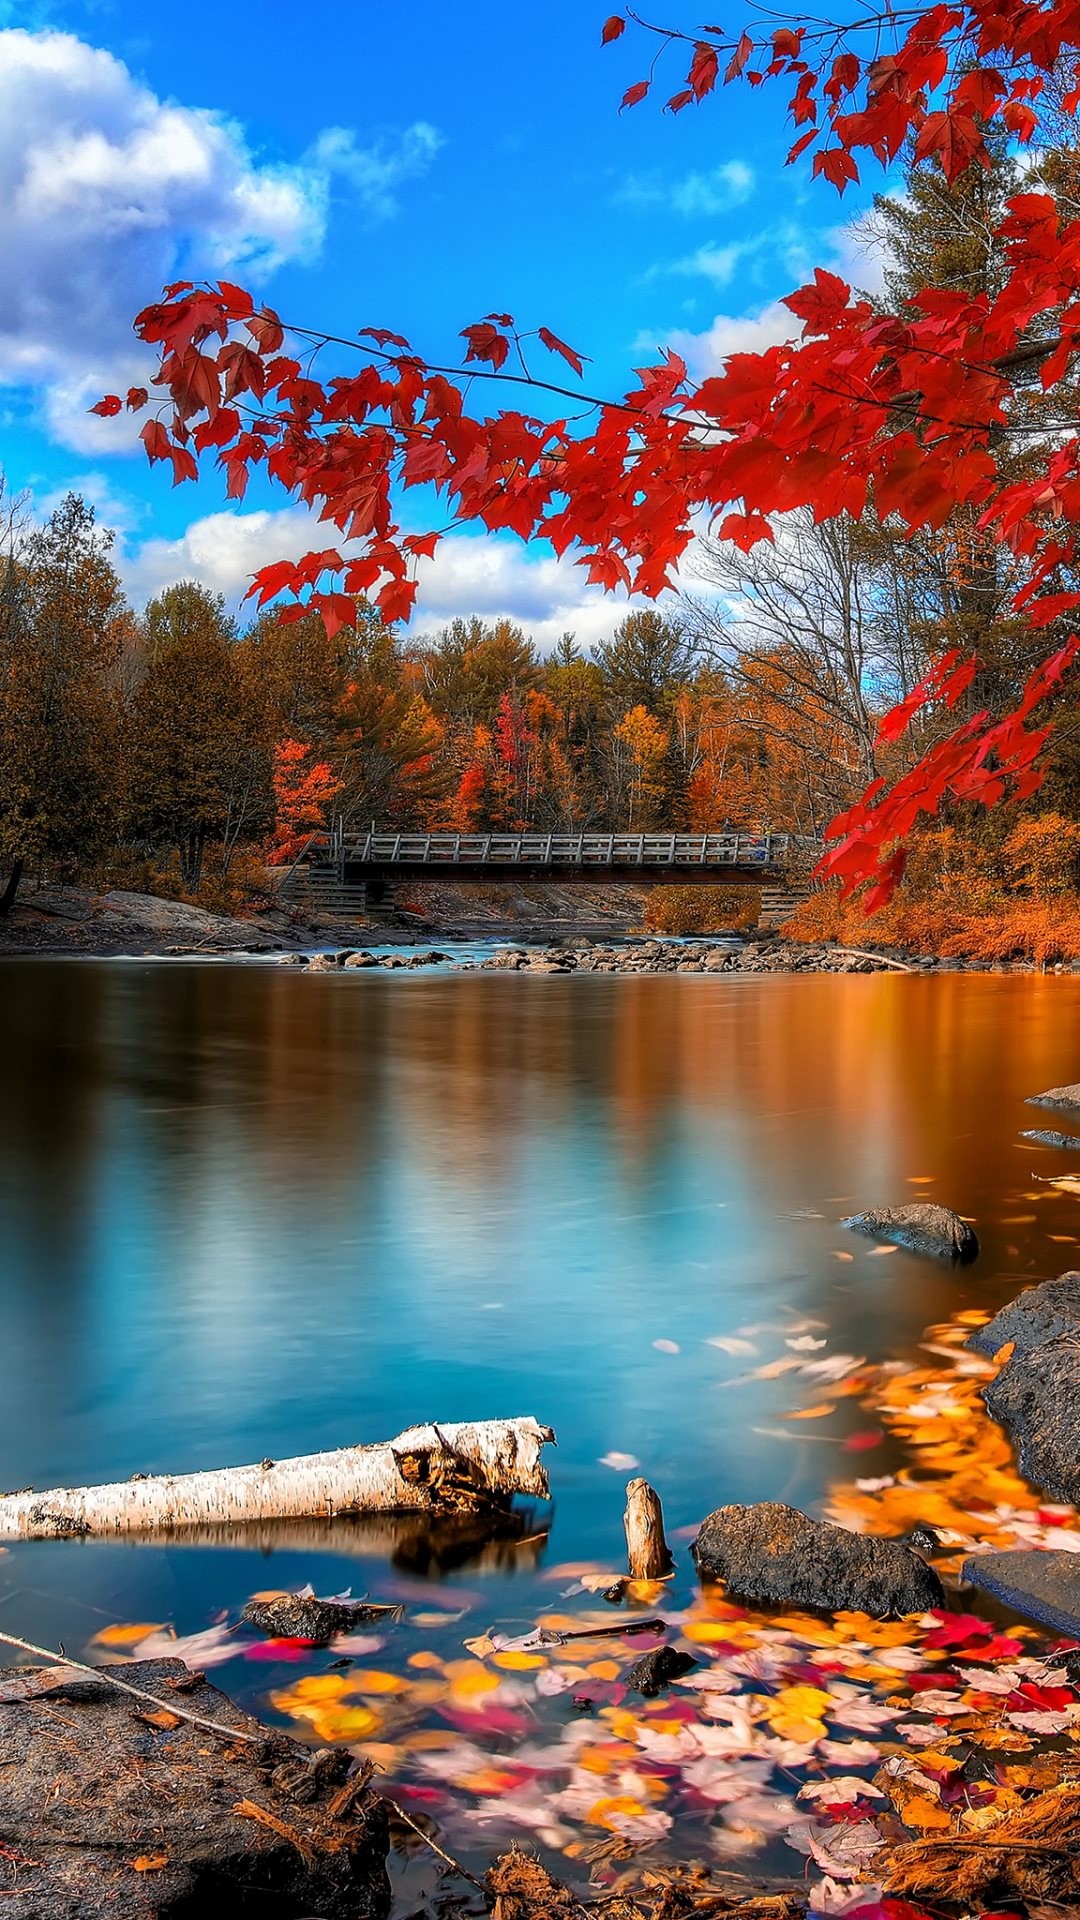 1080x1920 Autumn scenery - Tap to see more beautiful nature wallpapers! - @mobile9